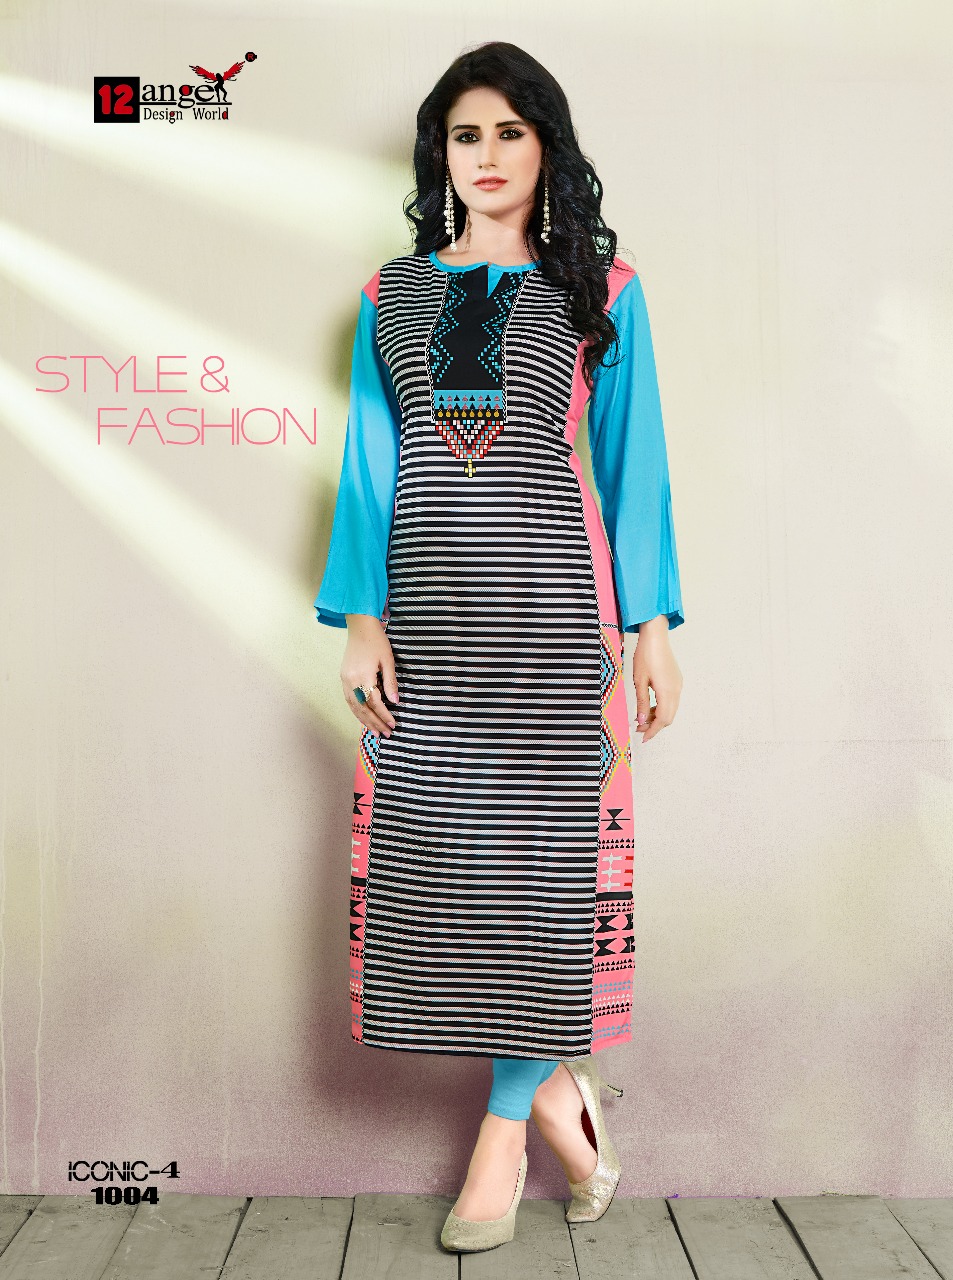 12 angel design world presenting iconic vol 4 casual ready to wear kurtis concept